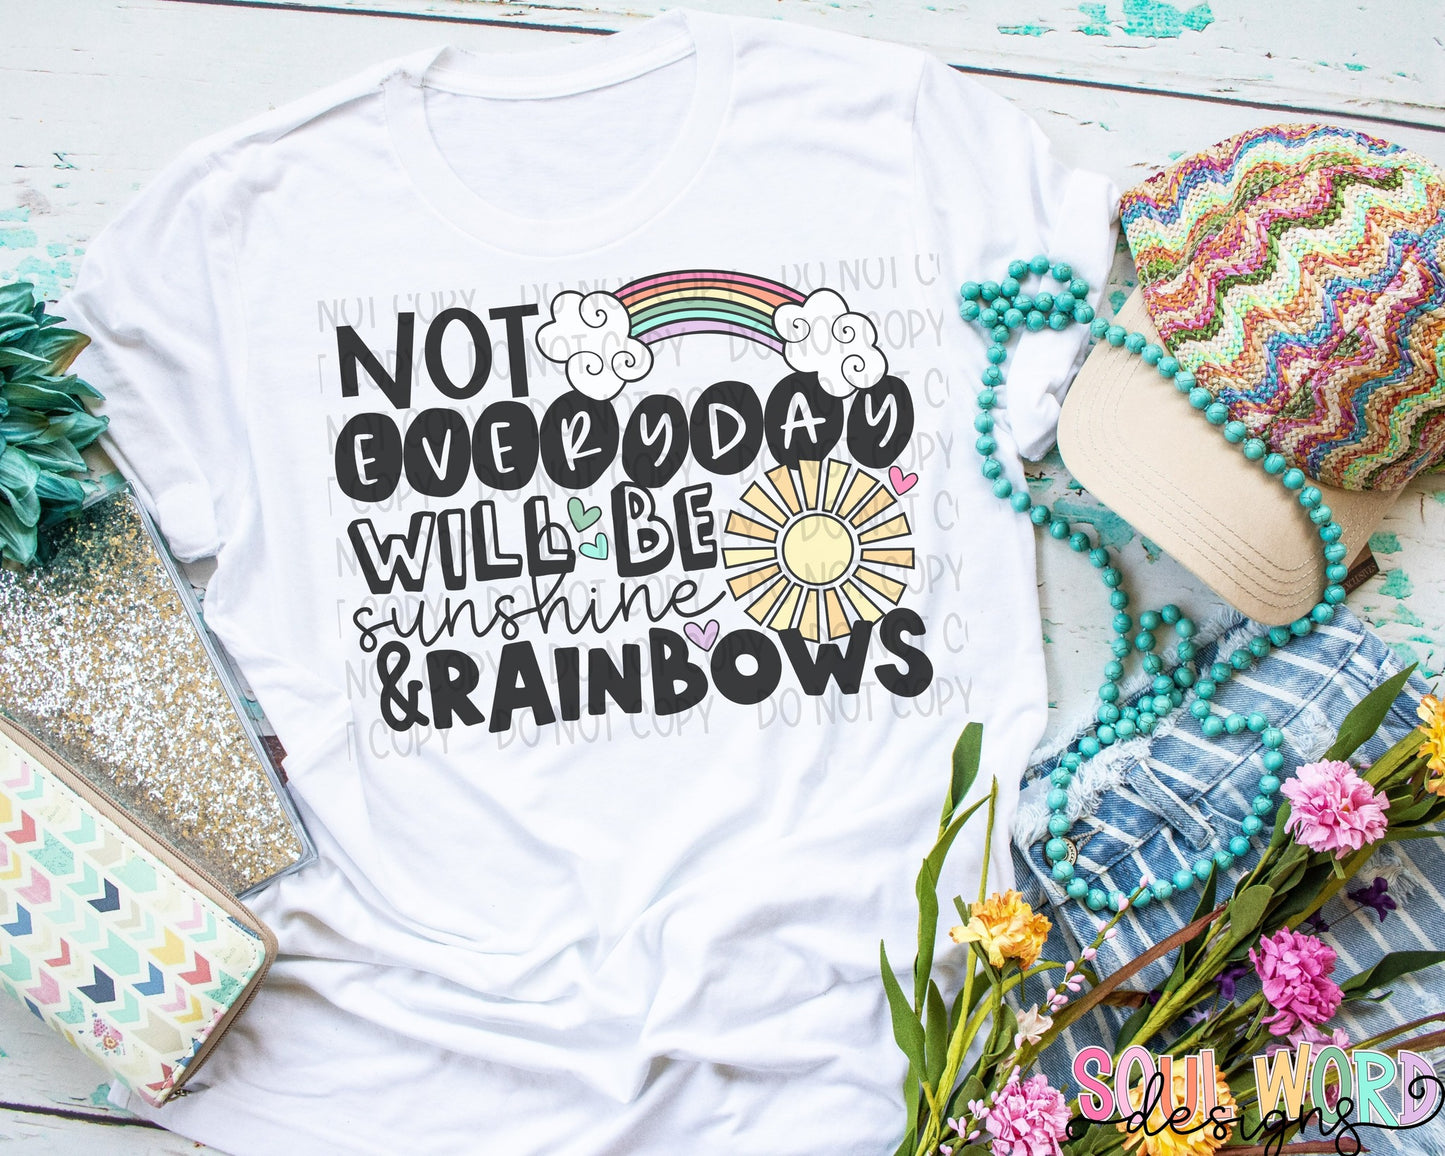 NOT EVERY DAY WILL BE SUNSHINE AND RAINBOWS T-SHIRT TANK OR SWEATSHIRT